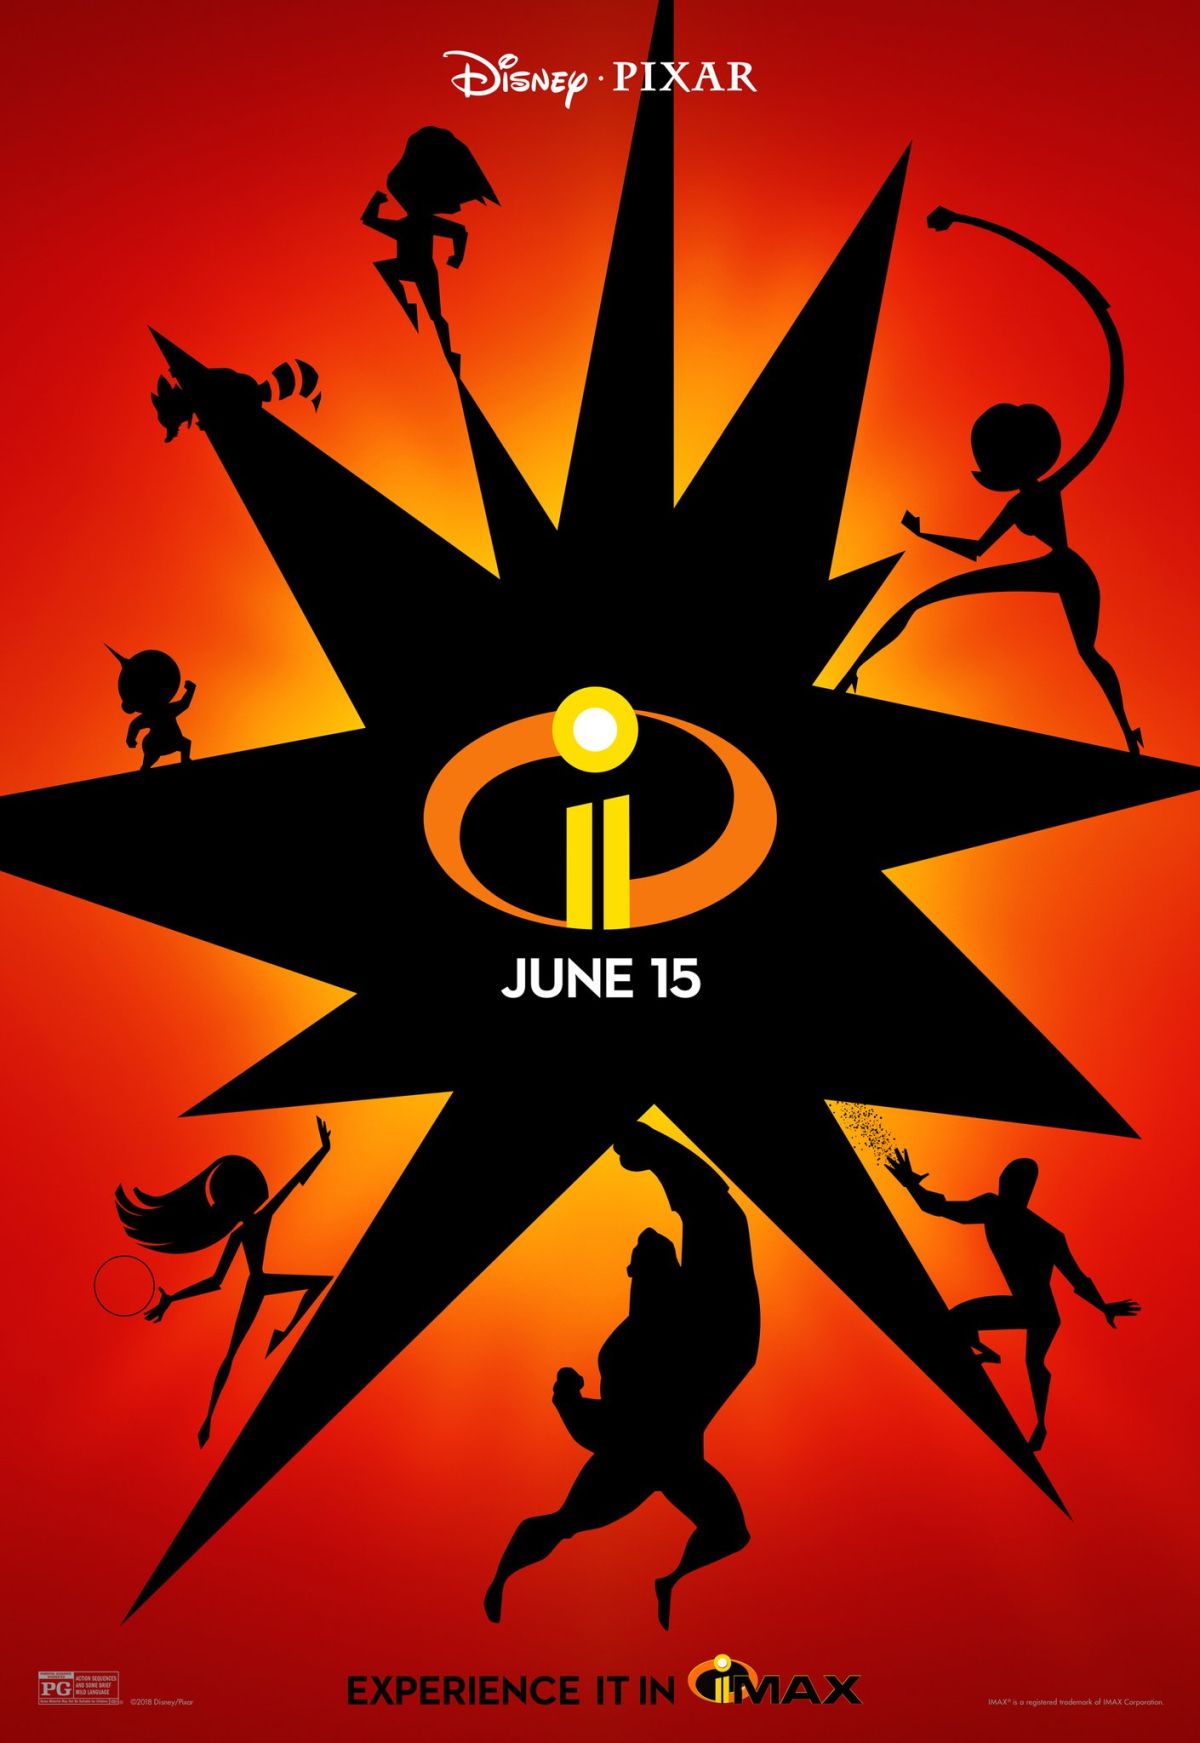 Updates On Incredibles 2, Supergirl And The Expanse